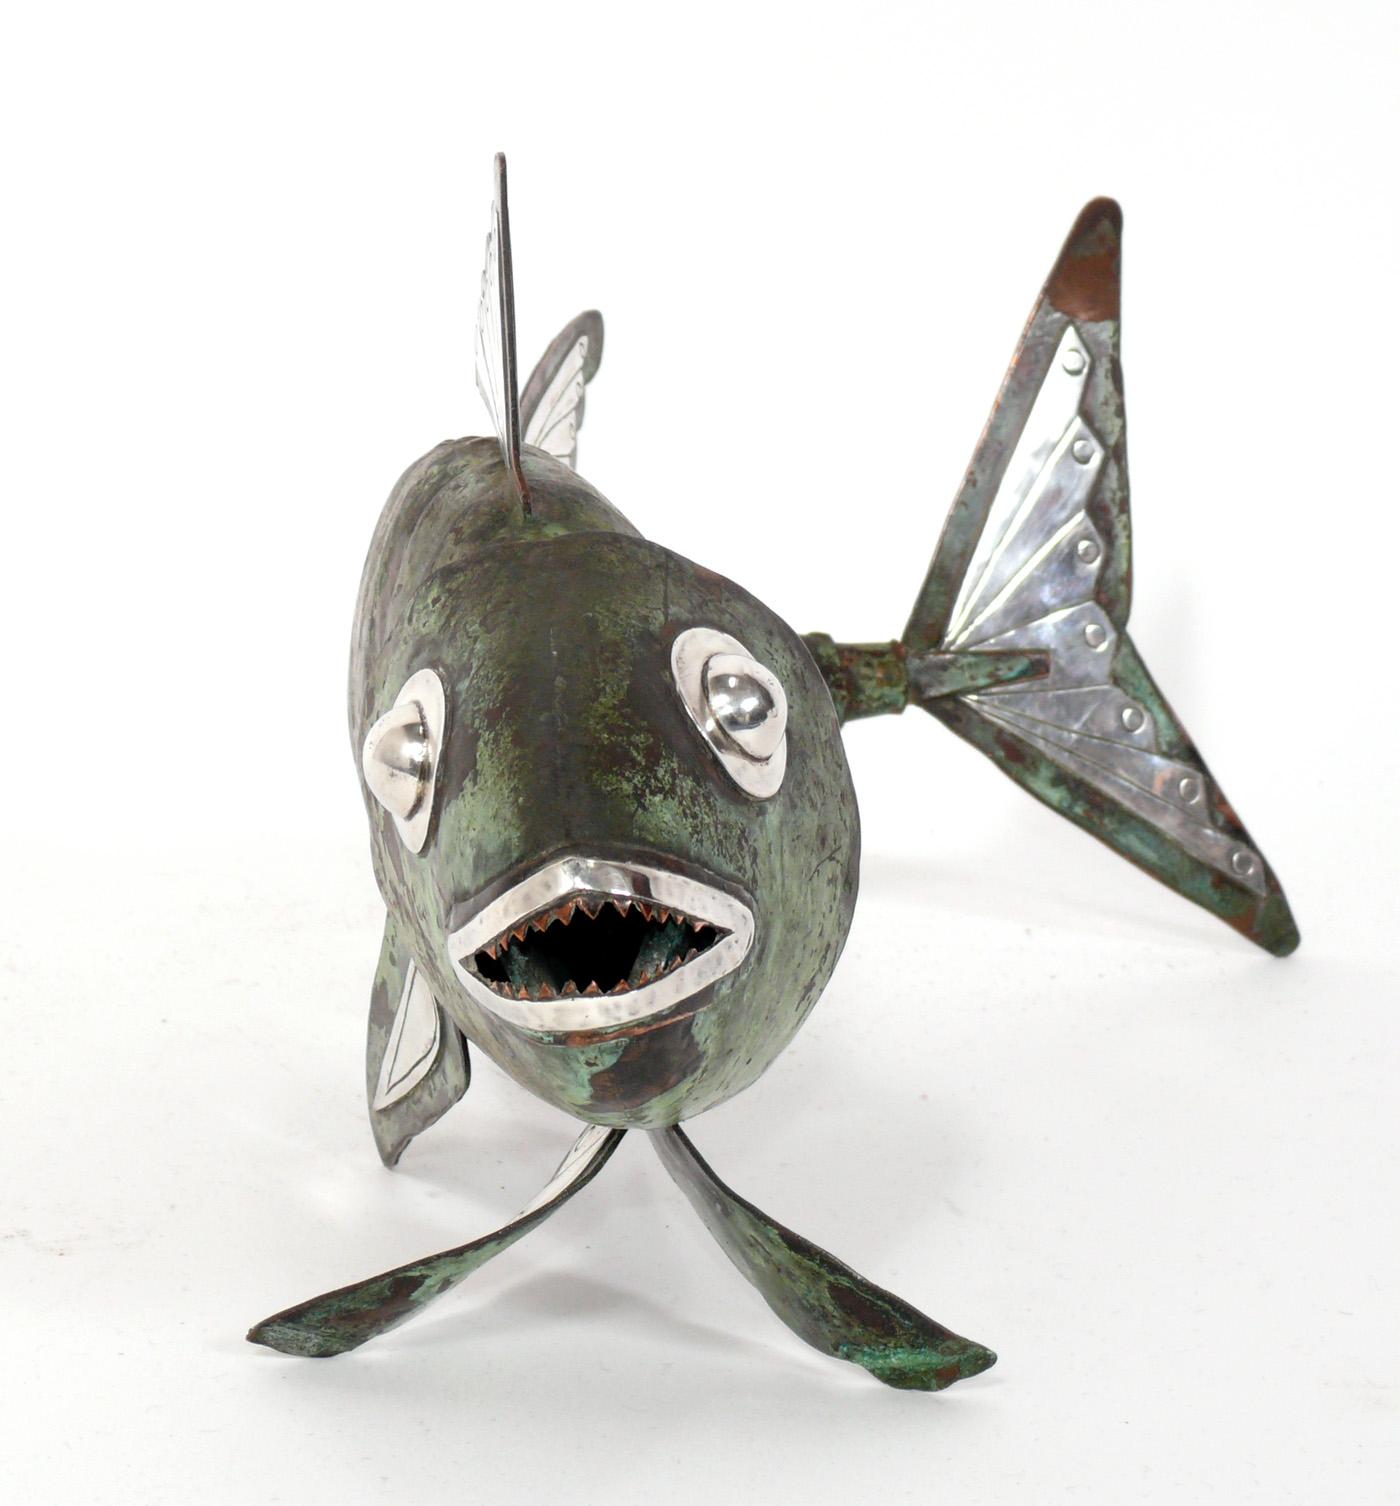 Hand Made Articulated Fish Sculpture, by Graziella Laffi, Peru, circa 1950s. Signed, see last photo. It is constructed of hand hammered verdigris patinated copper and sterling silver. Retains warm original patina.